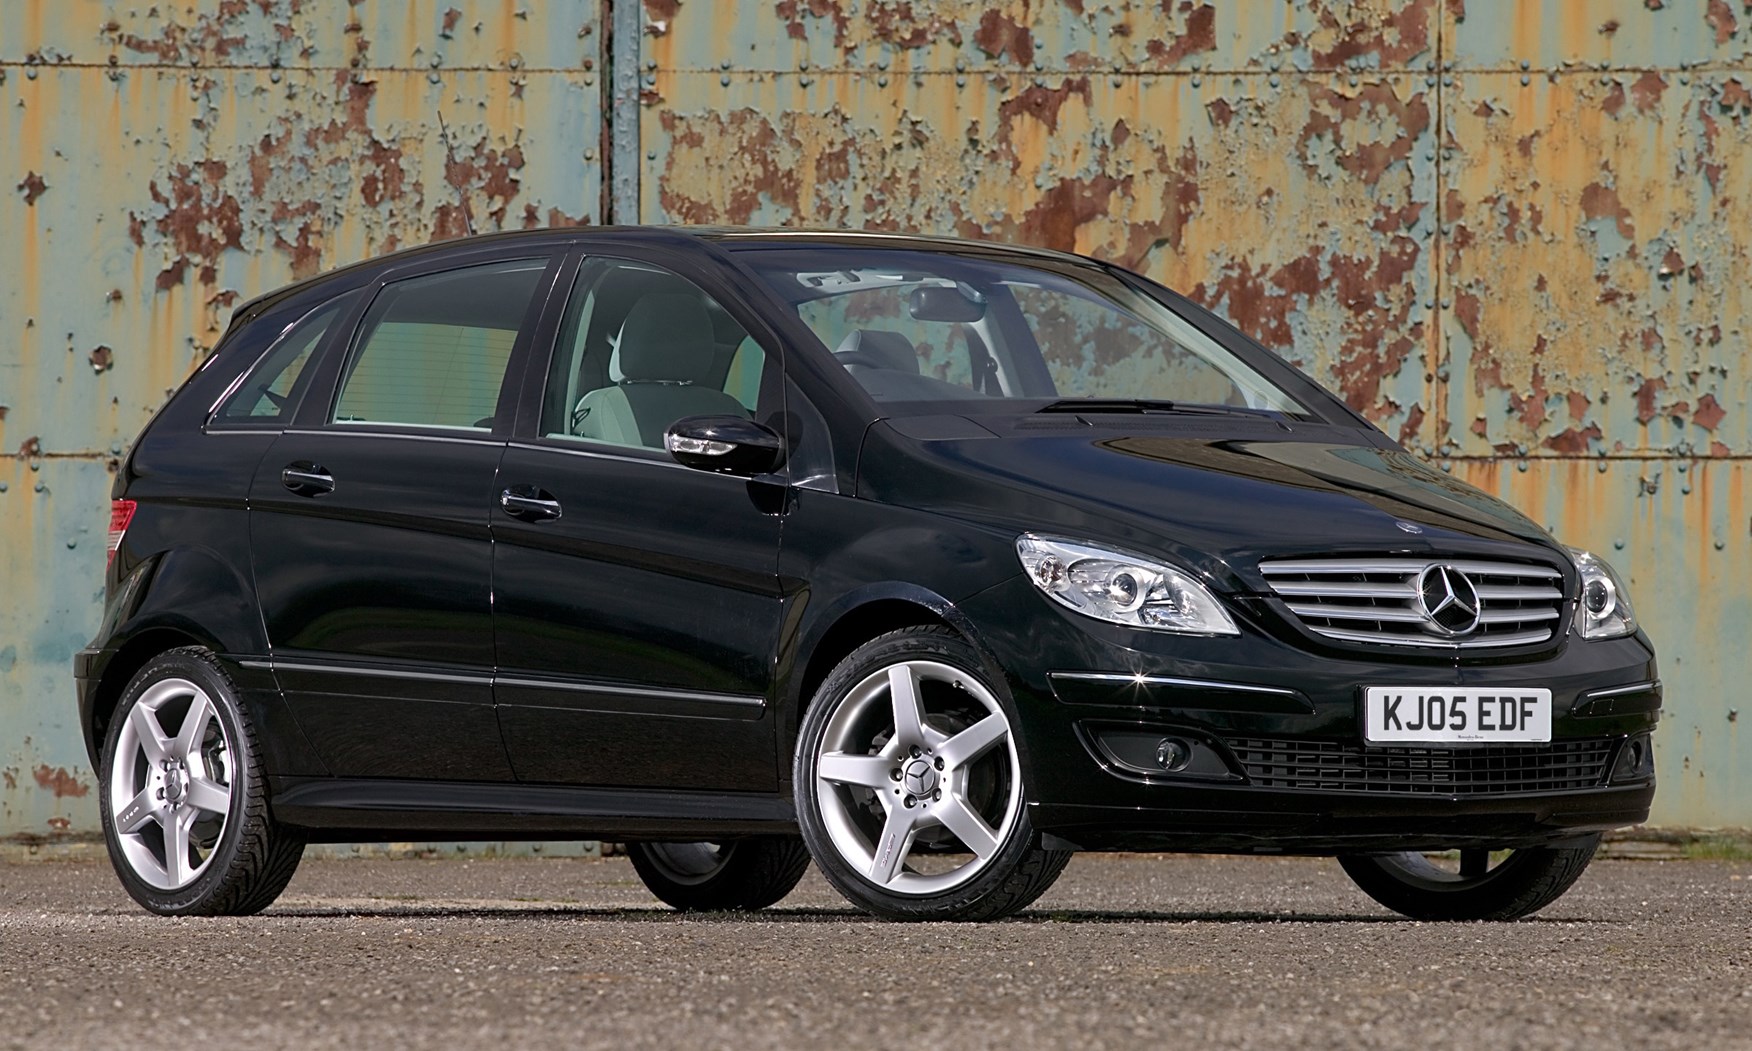 Used Mercedes Benz B Class Hatchback 2005 2011 Review